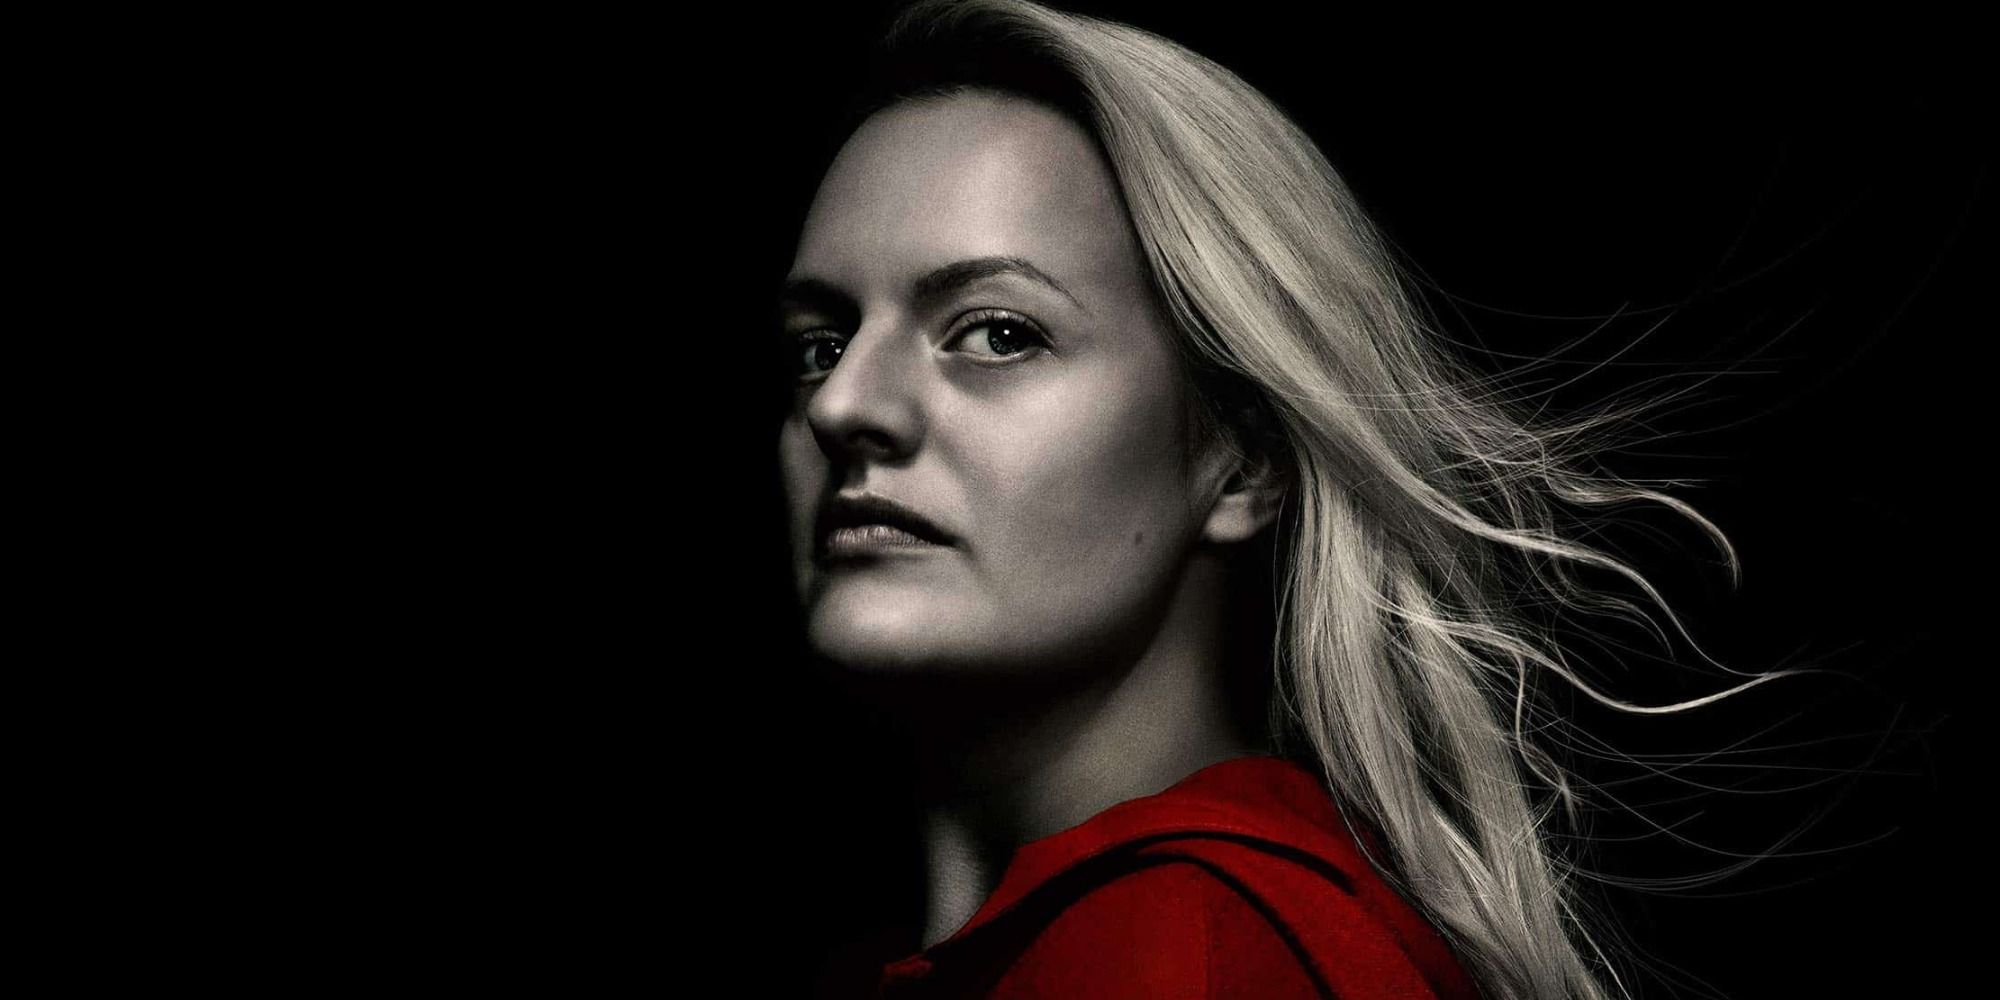 Elisabeth Moss as June in a promotional image for The Handmaid's Tale.